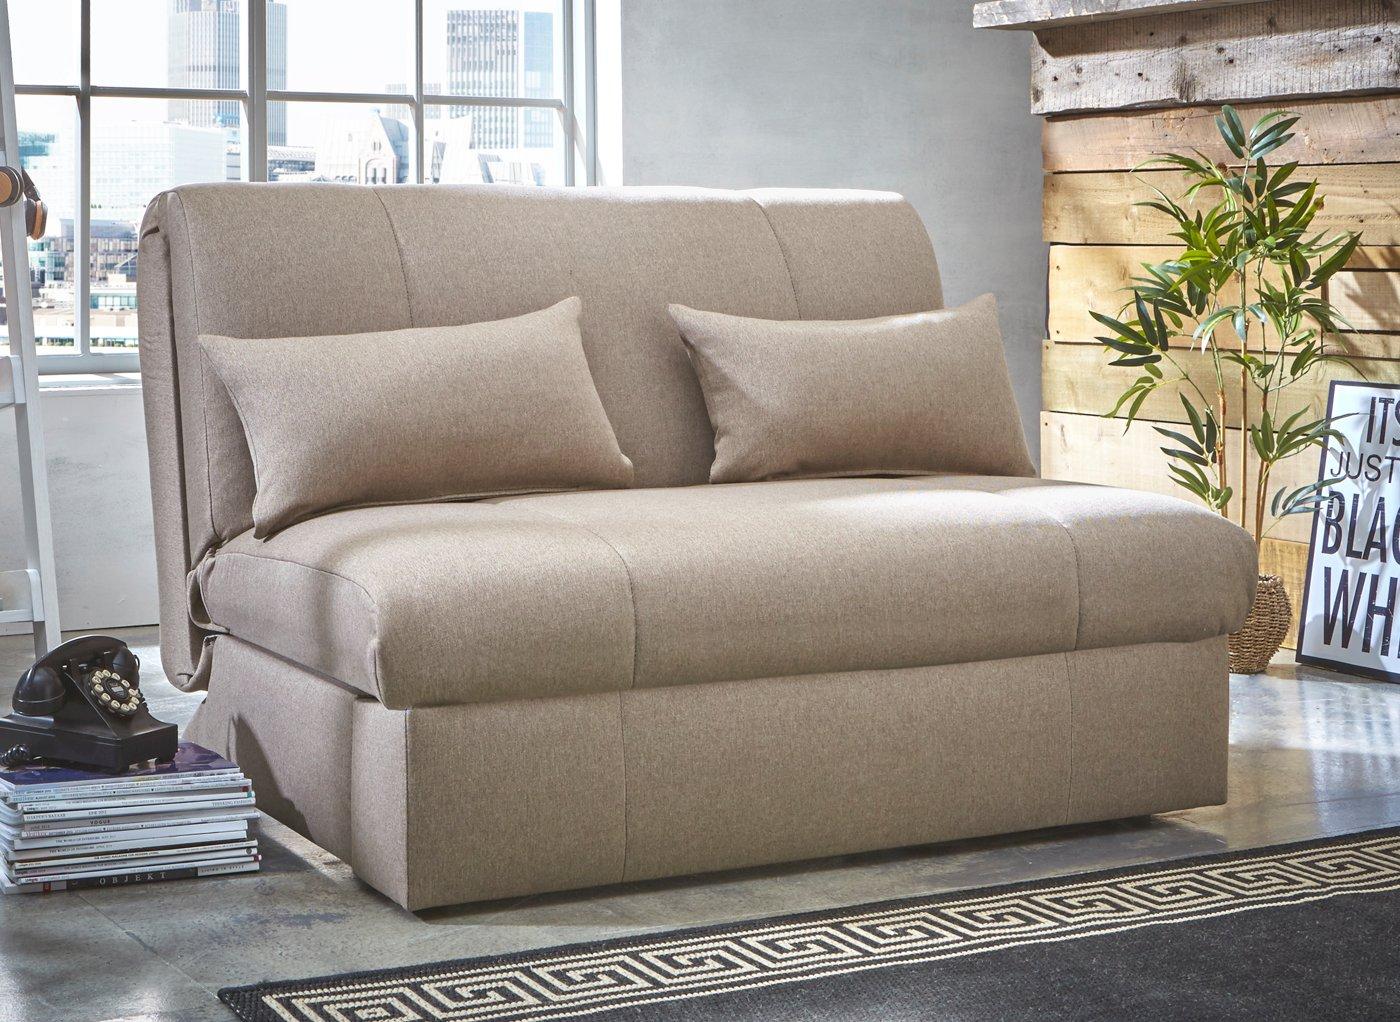 kelso sd sofa bed